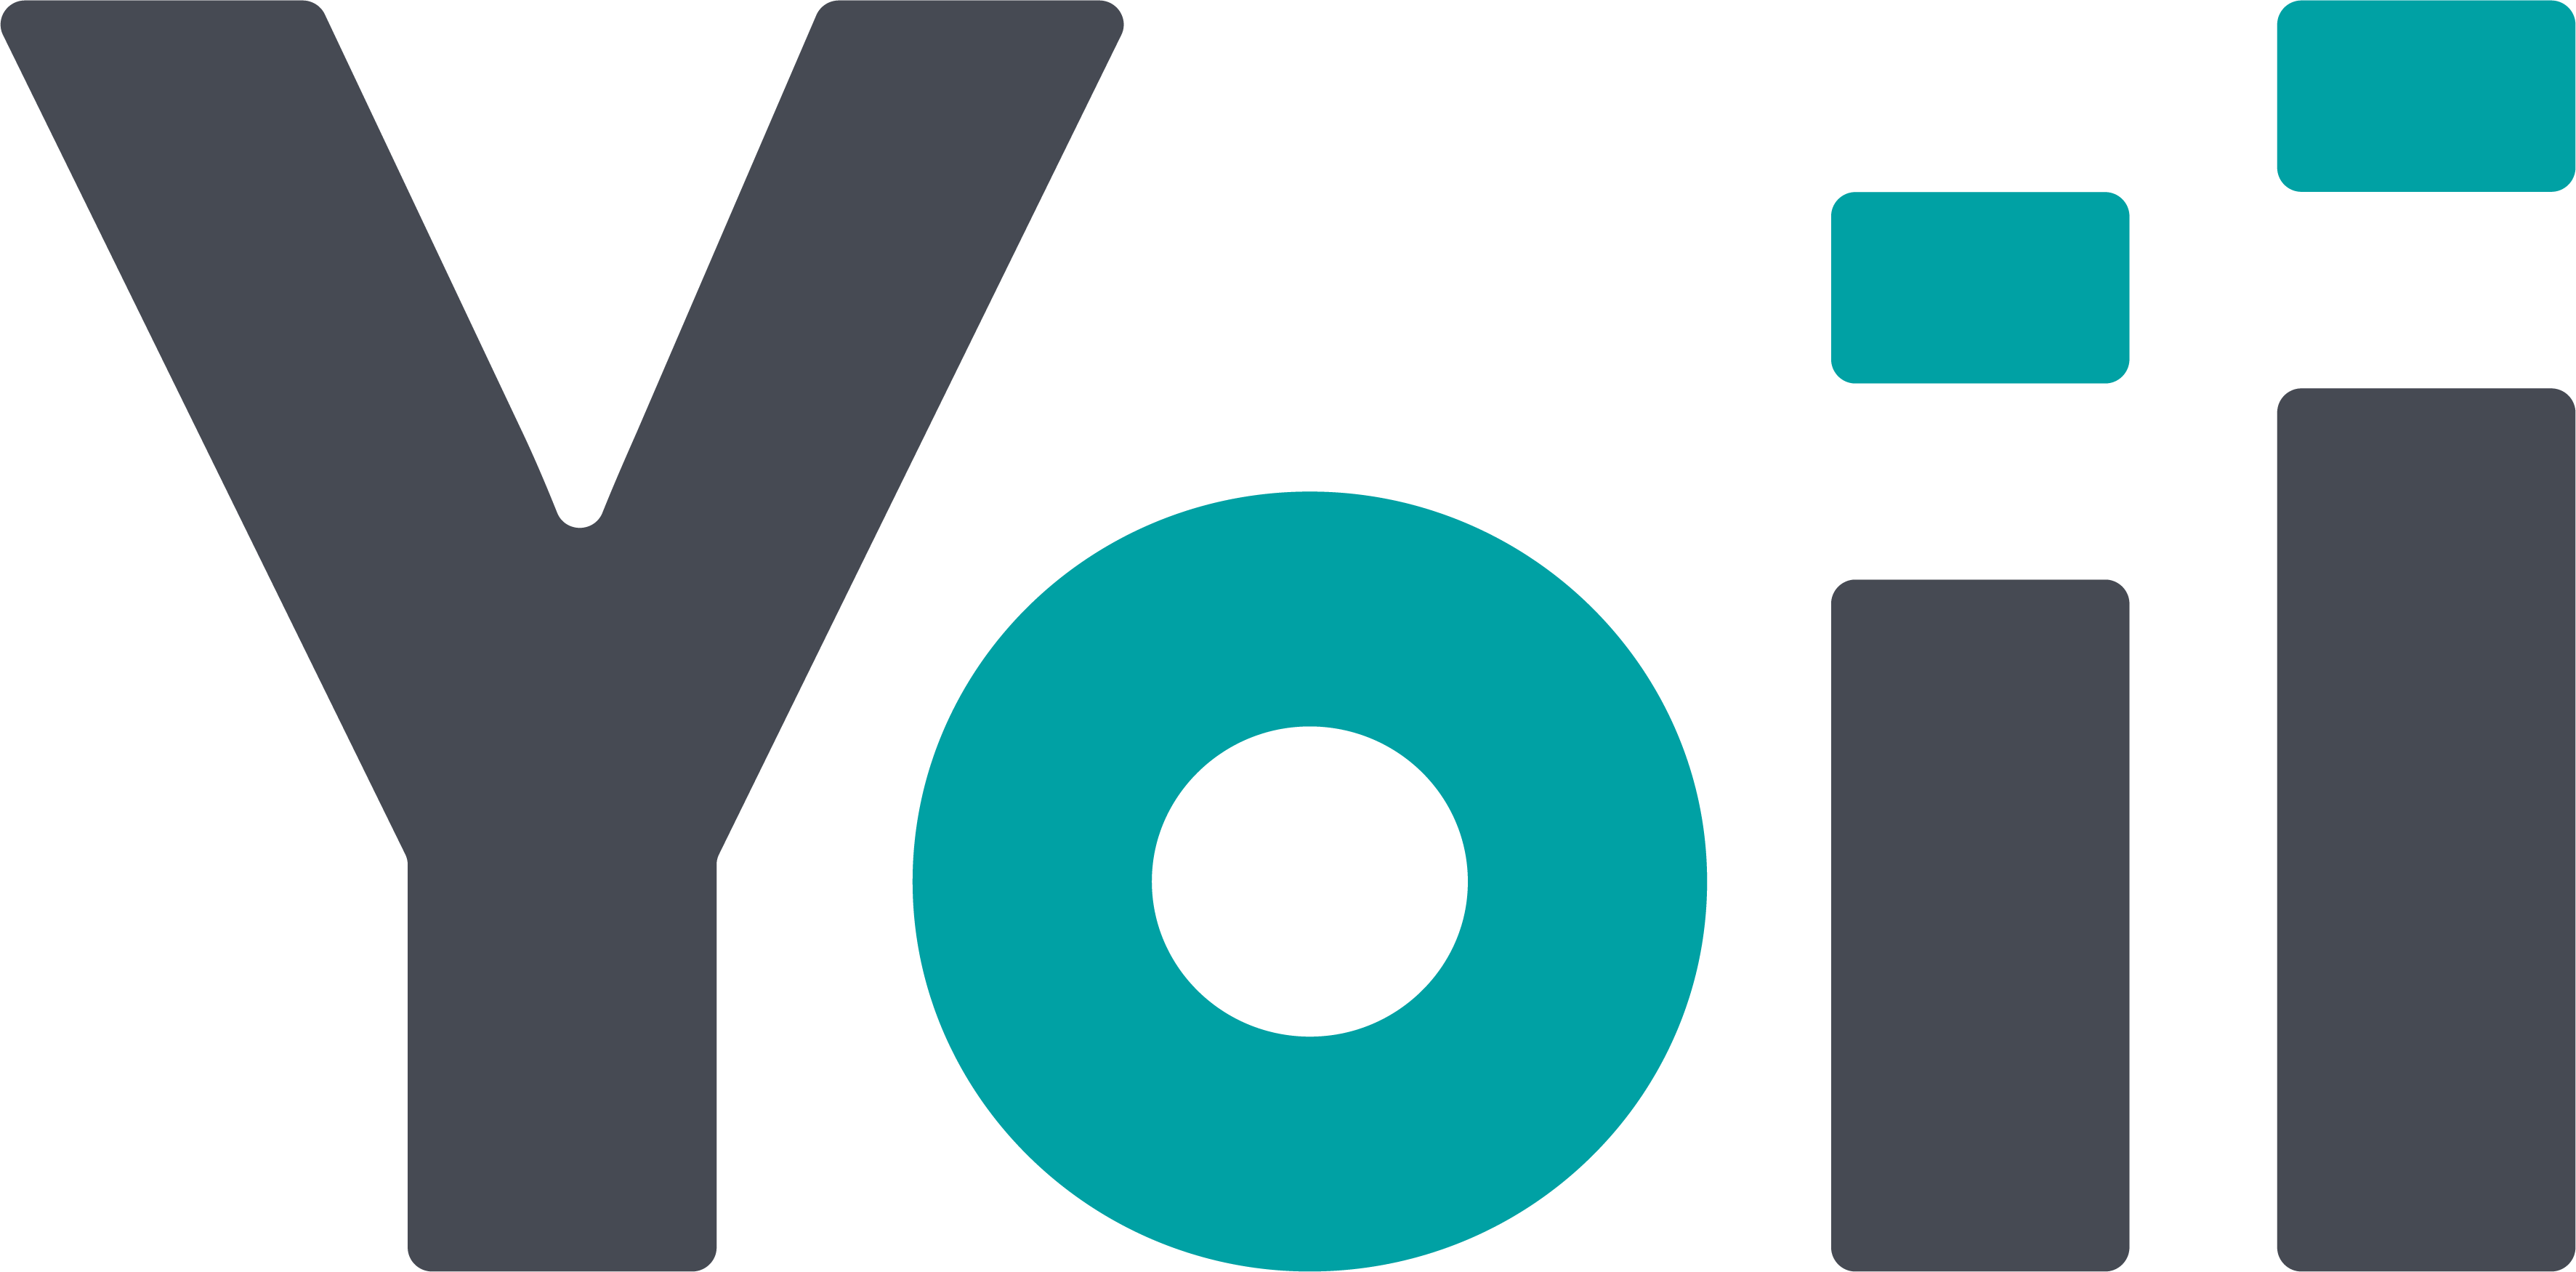 Yoii’s Series A Funding: A New Chapter in Japan’s Fintech Startup Ecosystem